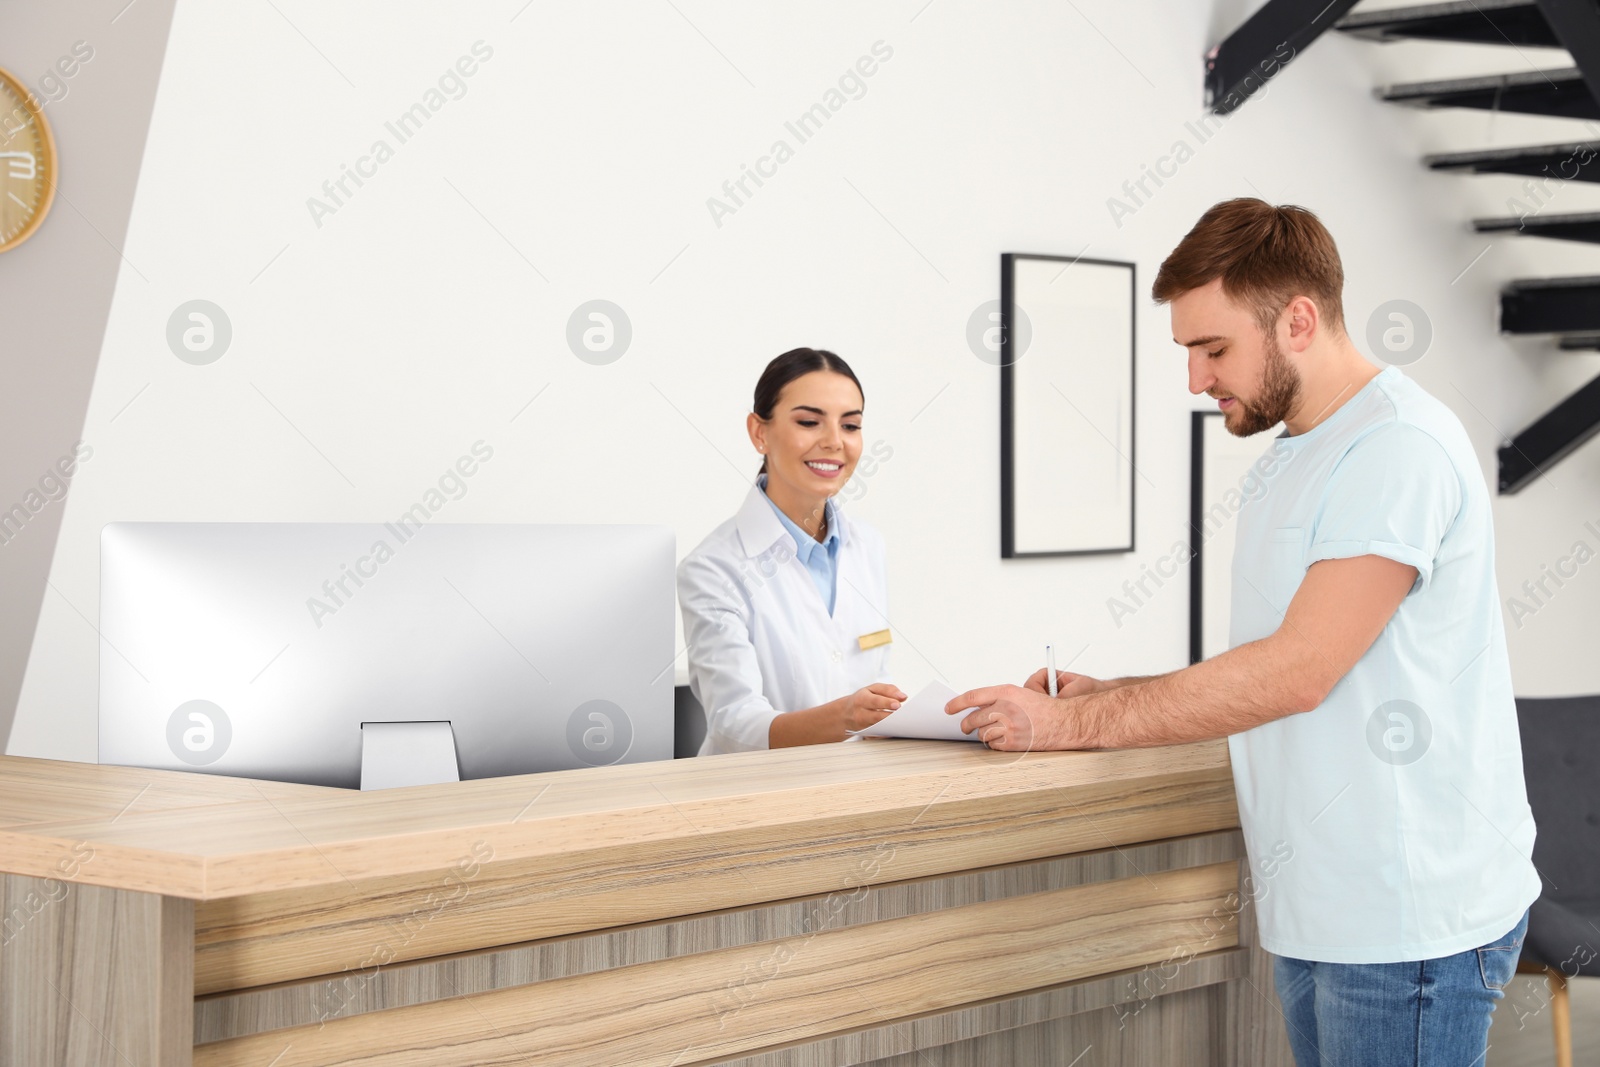 Photo of Professional receptionist working with patient at desk in modern clinic